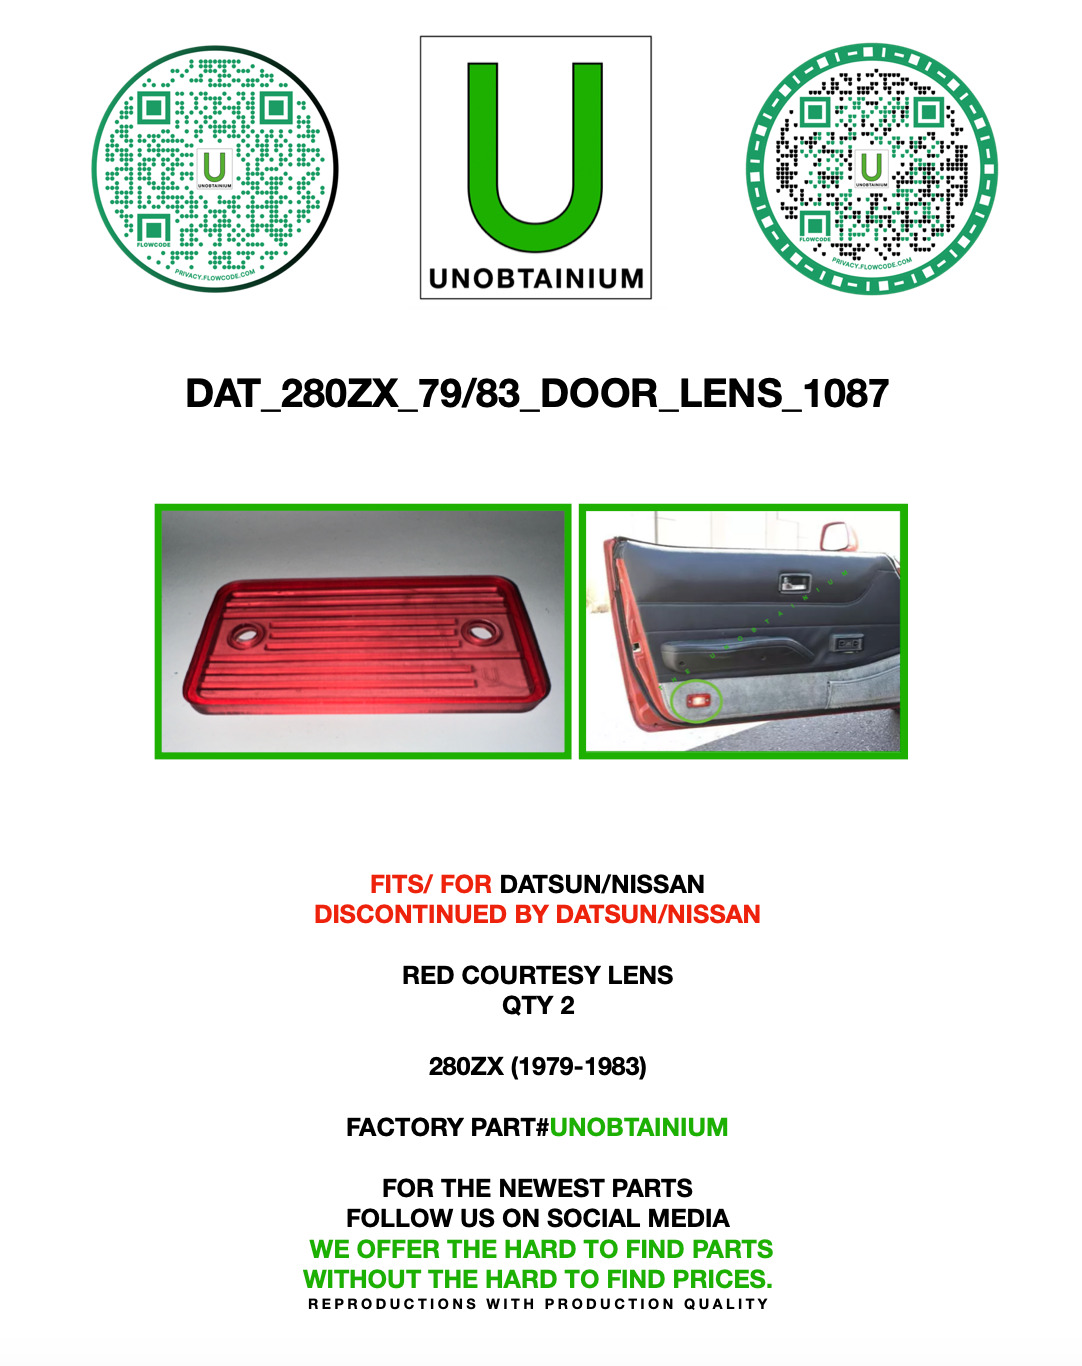 FITS/FOR DATSUN/NISSAN 280ZX (1979-1983) DOOR COURTESY LENS PAIR